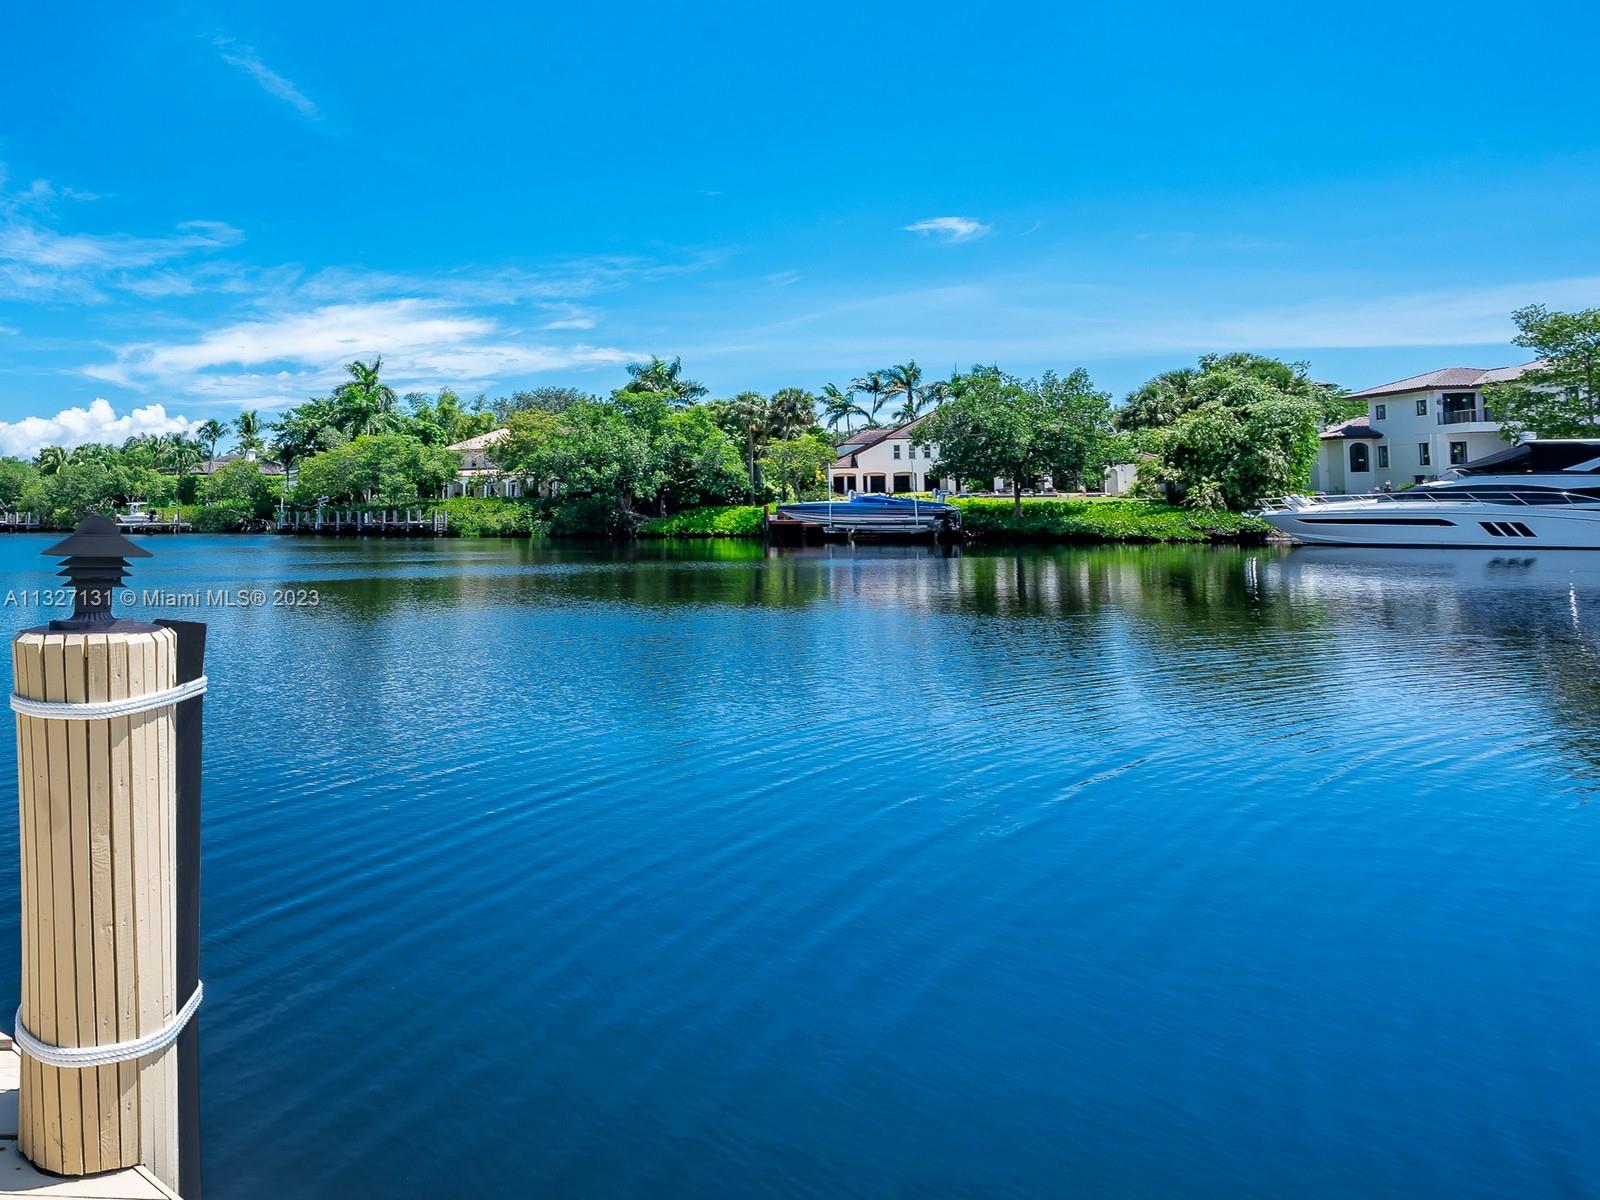 waterfront views from this one story home located in Cocoplum, one of the most desirable gated communities in Coral Gables. This beautiful 6,735 adjusted sqft home, with 6 Bed, 5 1/2 Bath, and a 2 car garage, showcases breathtaking wide canal water views with resort-like gardens visible from almost every room. Living room with fireplace, formal dining room, entertaining area, kitchen, office space, playroom and more. Brick circular driveway with porte cochere accommodates a large family and excellent for entertaining. Meticulously maintained. Largest lot in Cocoplum on the market with approx. 32,000 sqft, dock of 80 ft, and water frontage of 138 ft. Expansive covered terrace, summer kitchen, and large pool with whirlpool.